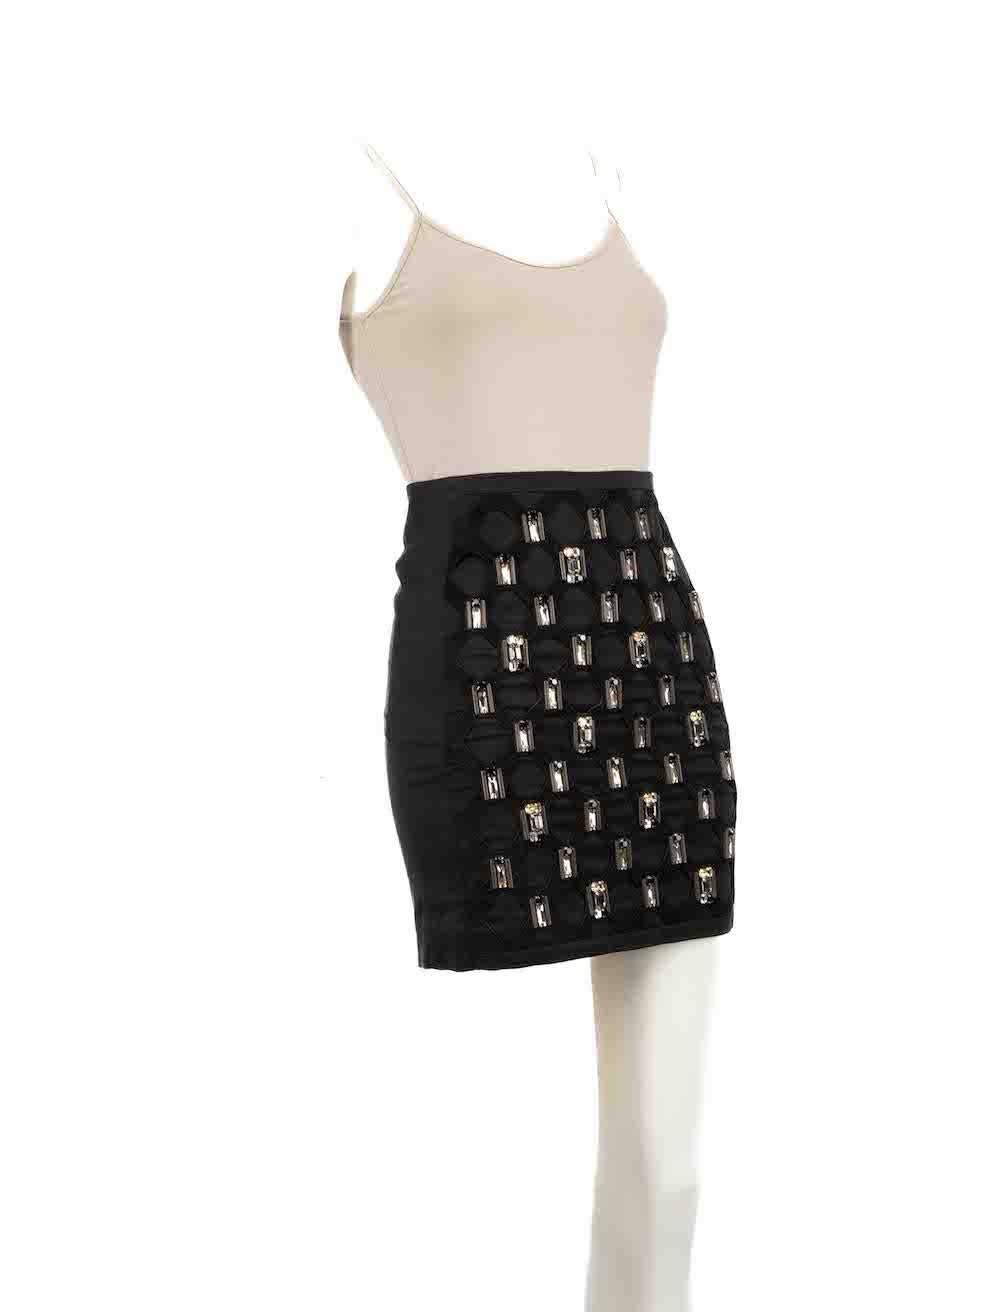 CONDITION is Very good. Hardly any visible wear to skirt is evident on this used All Saints designer resale item.
 
 
 
 Details
 
 
 Black
 
 Synthetic
 
 Skirt
 
 Mini
 
 Figure hugging fit
 
 Embellished front
 
 Back zip and hook fastening
 
 
